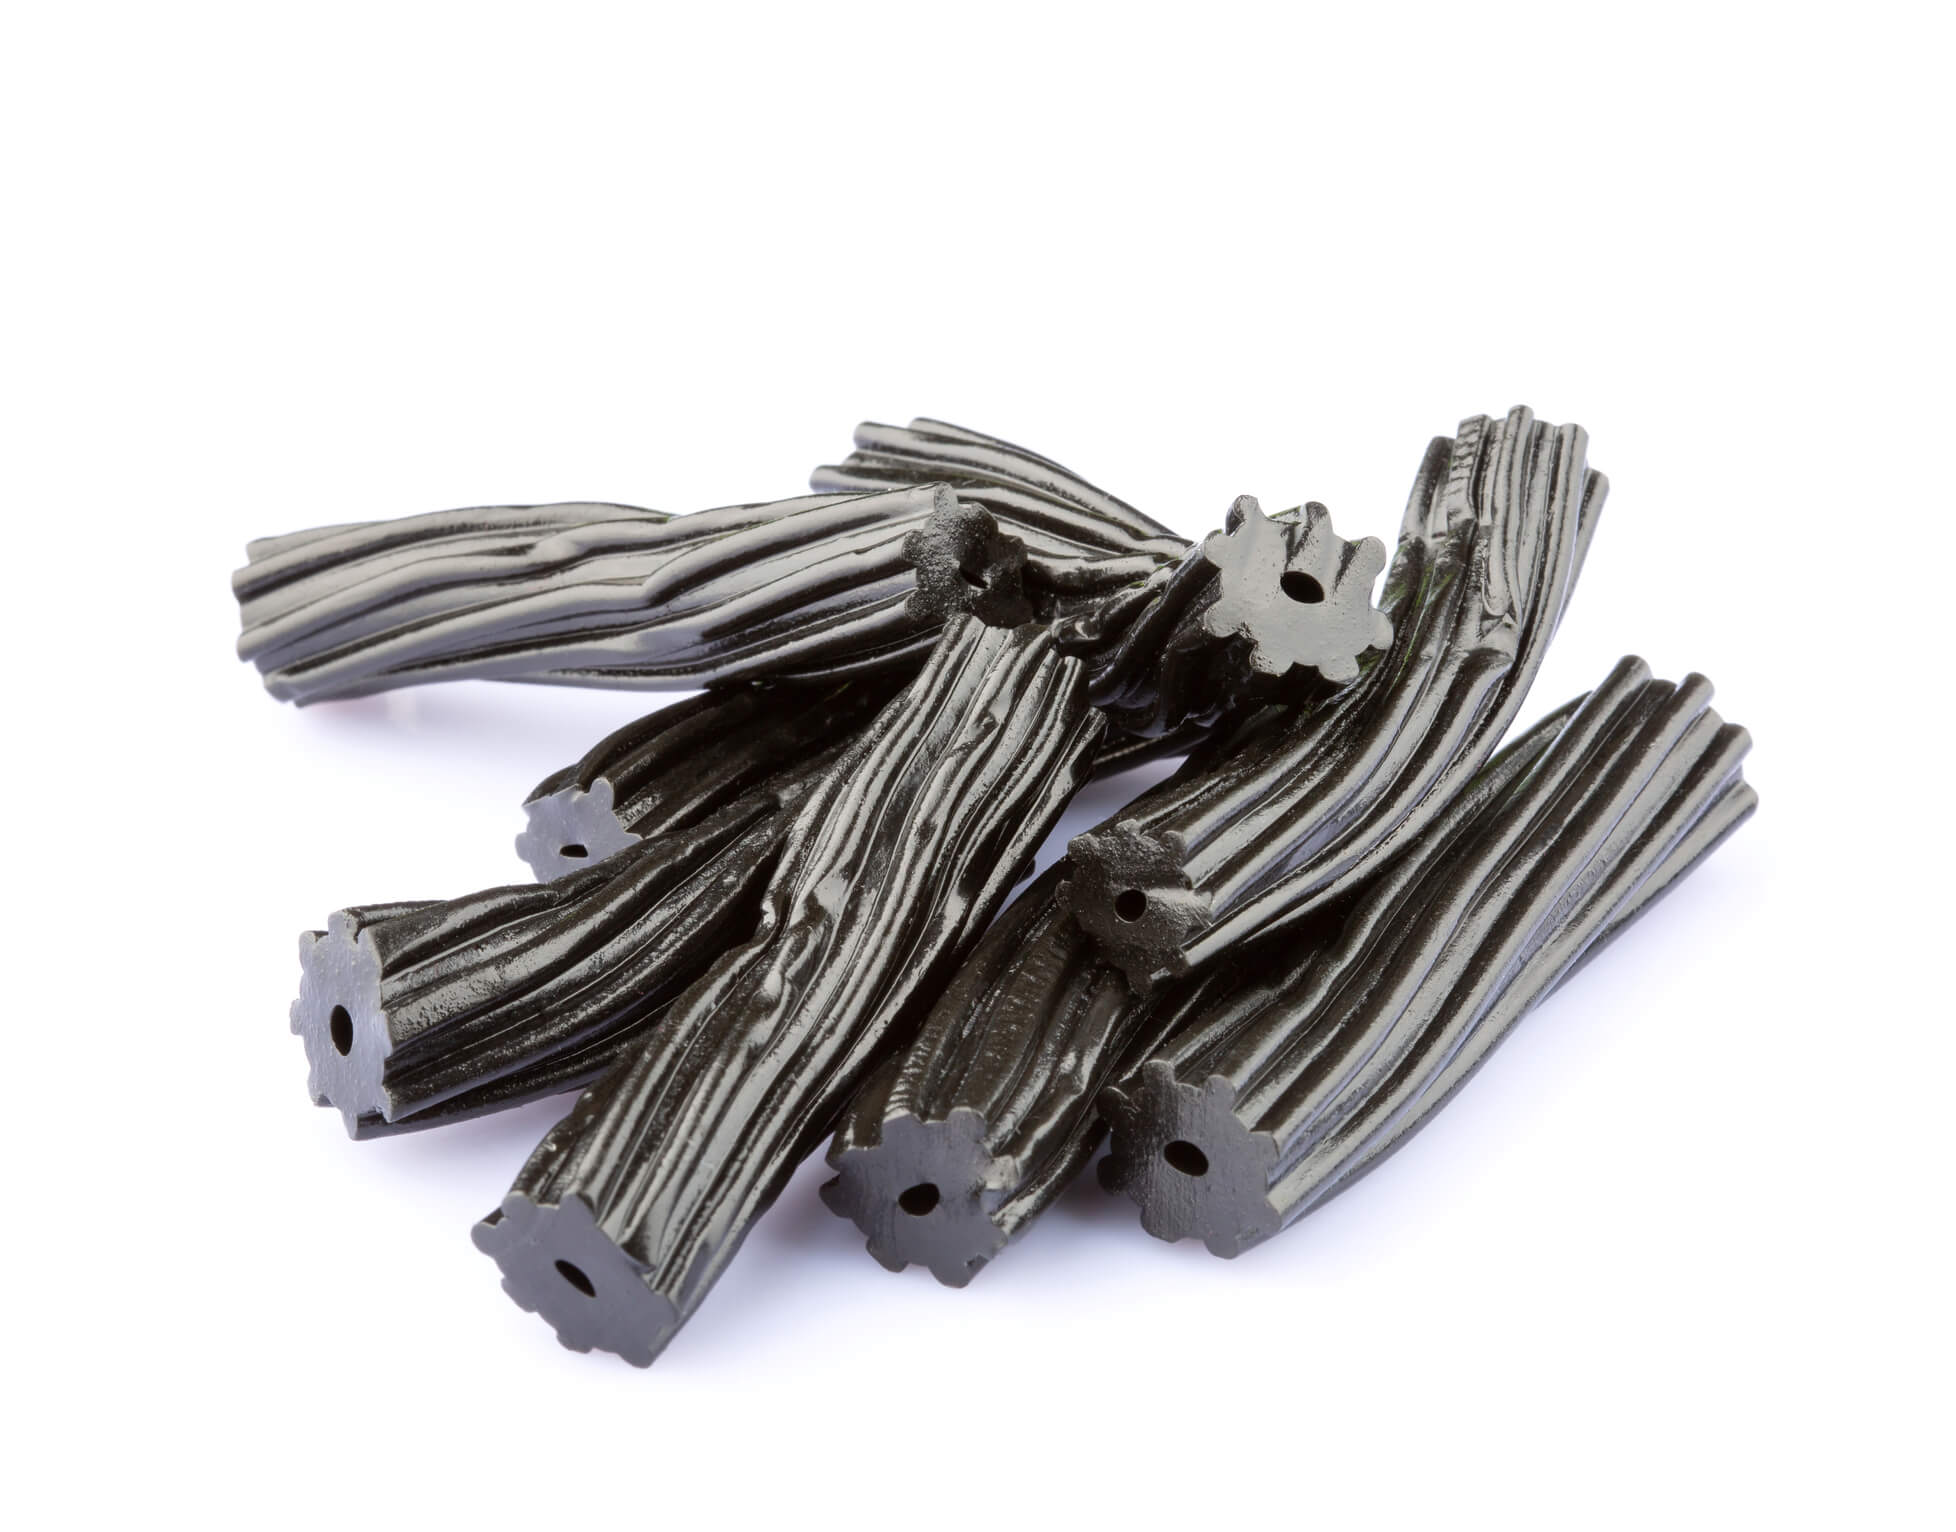 A pile of pieces of black licorice against a clean white background